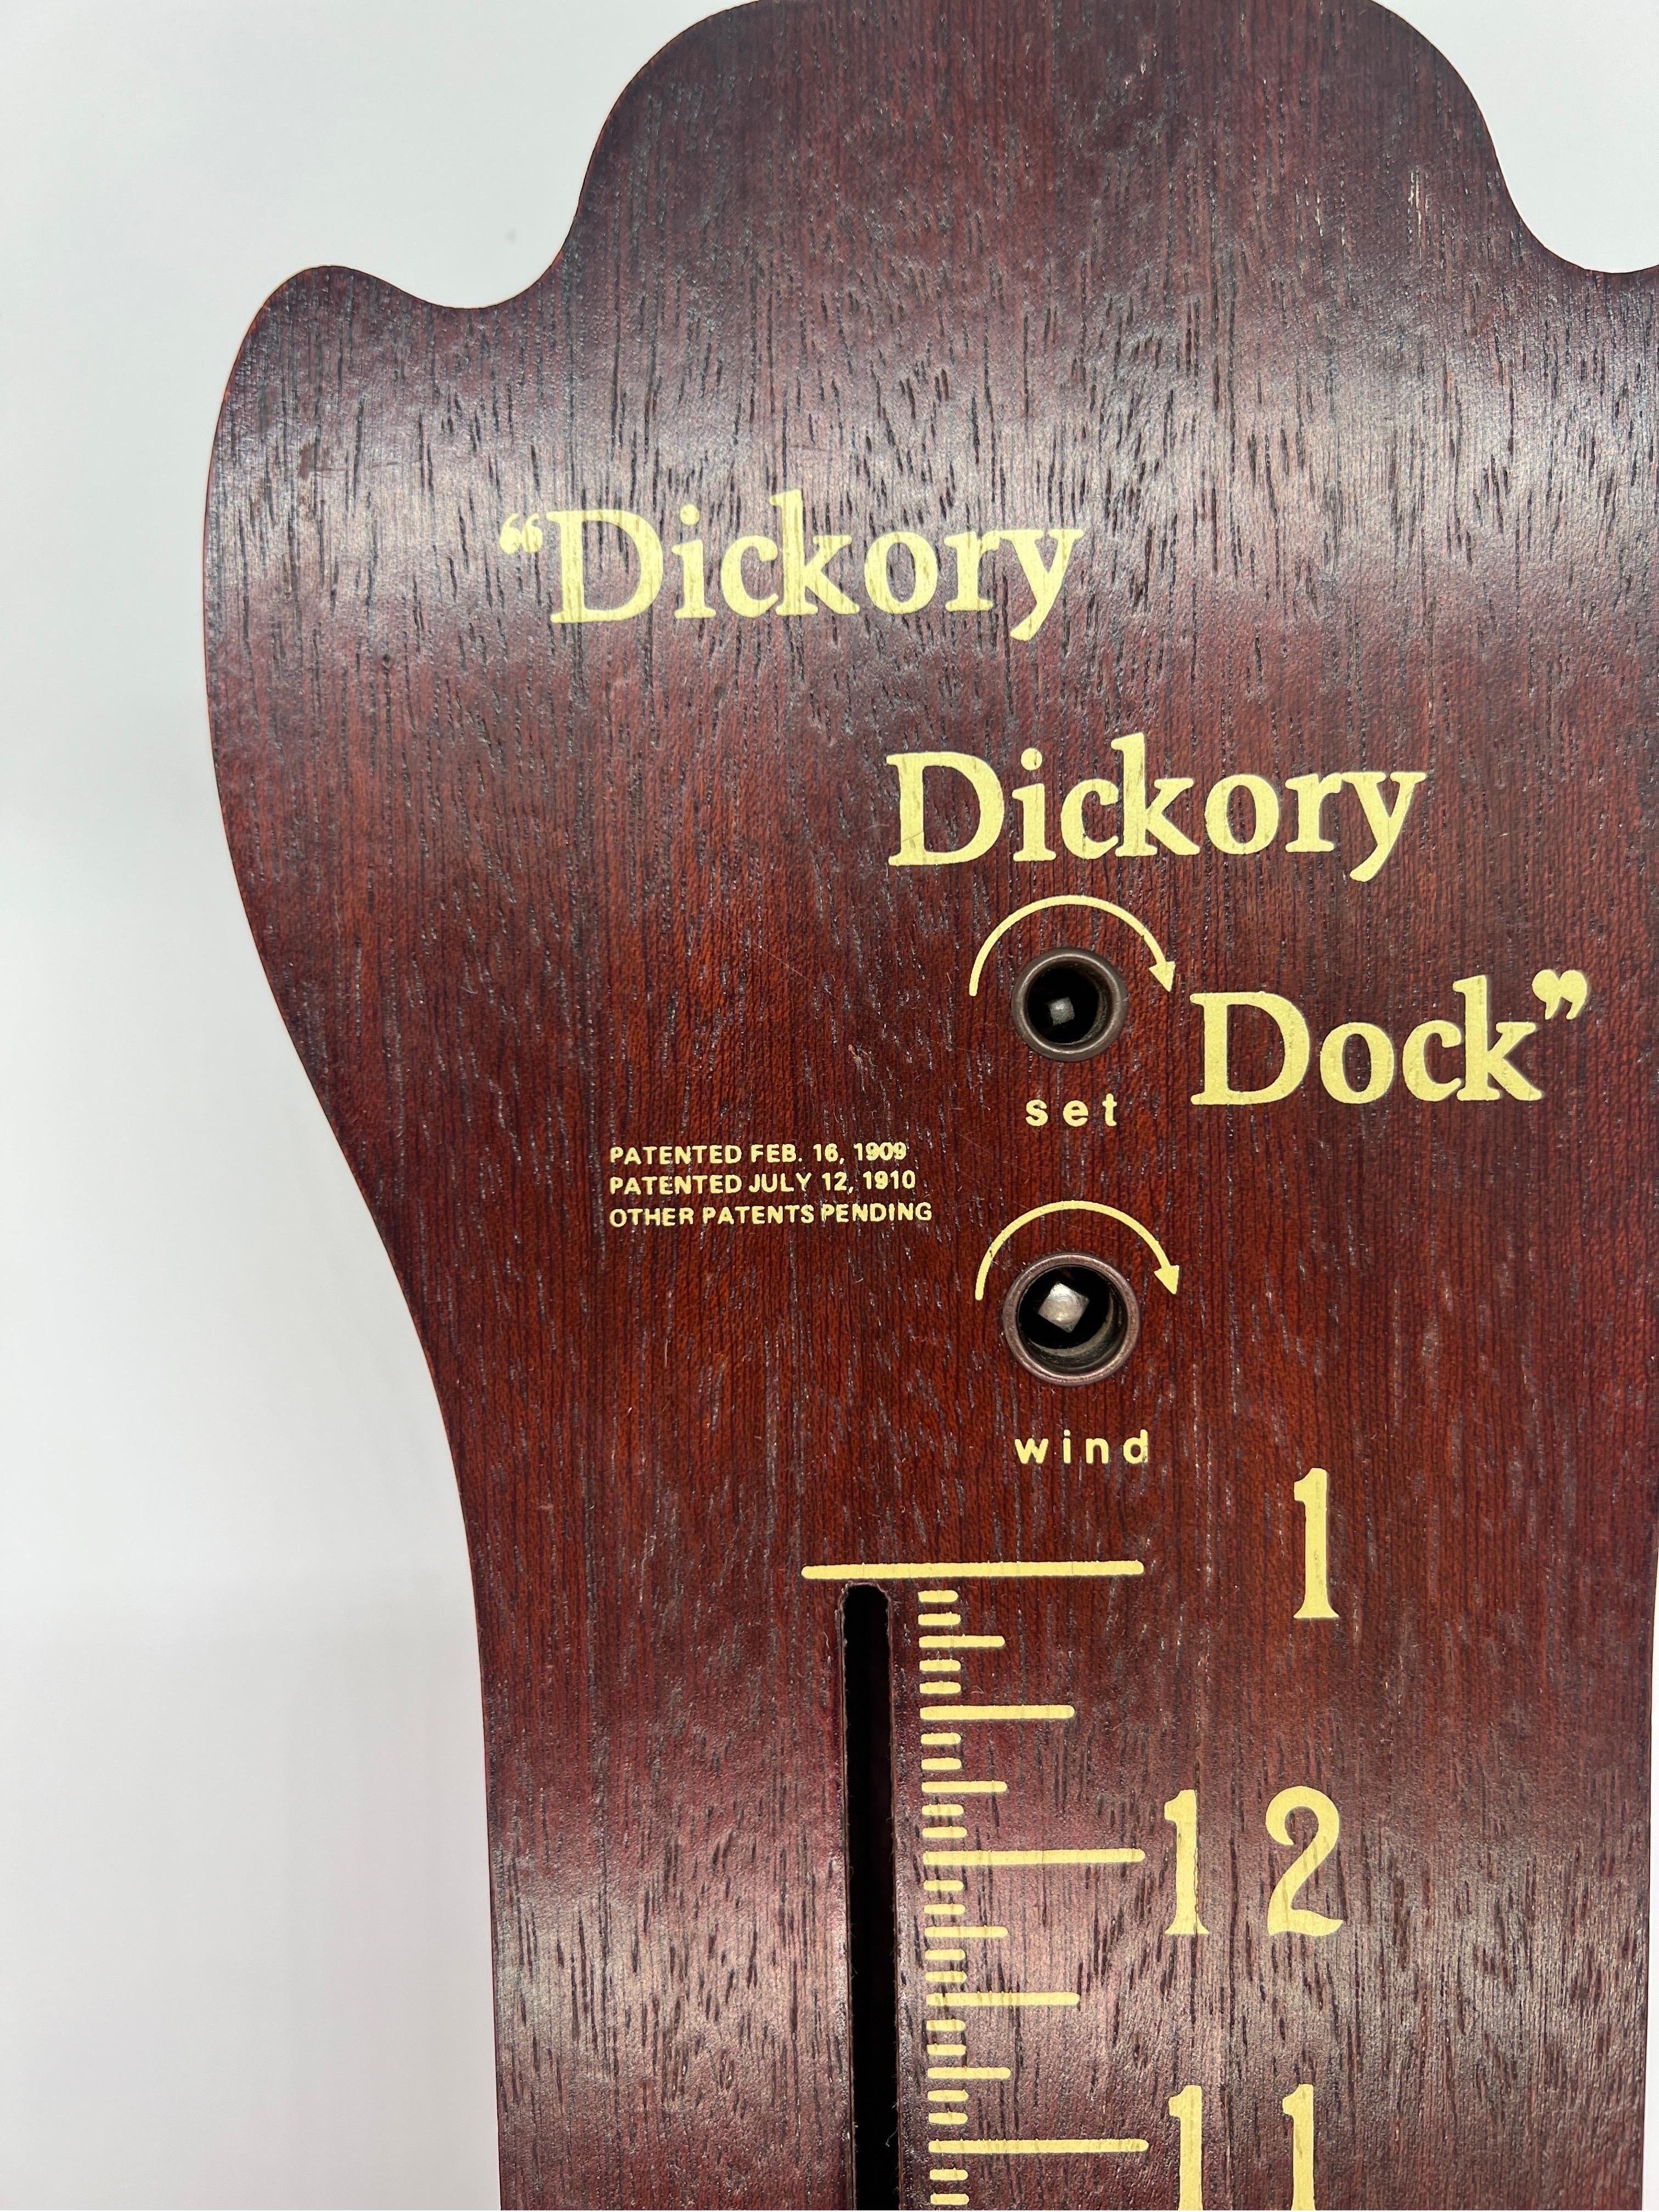 Hickory Dickory Dock Mouse Novelty Wall Clock - The Mouse Reads Time

While the clock is running, the little mouse is climbing up to the top of the case. And when it reaches No. 1, it quickly slides down to the bottom and hits the bell inside the